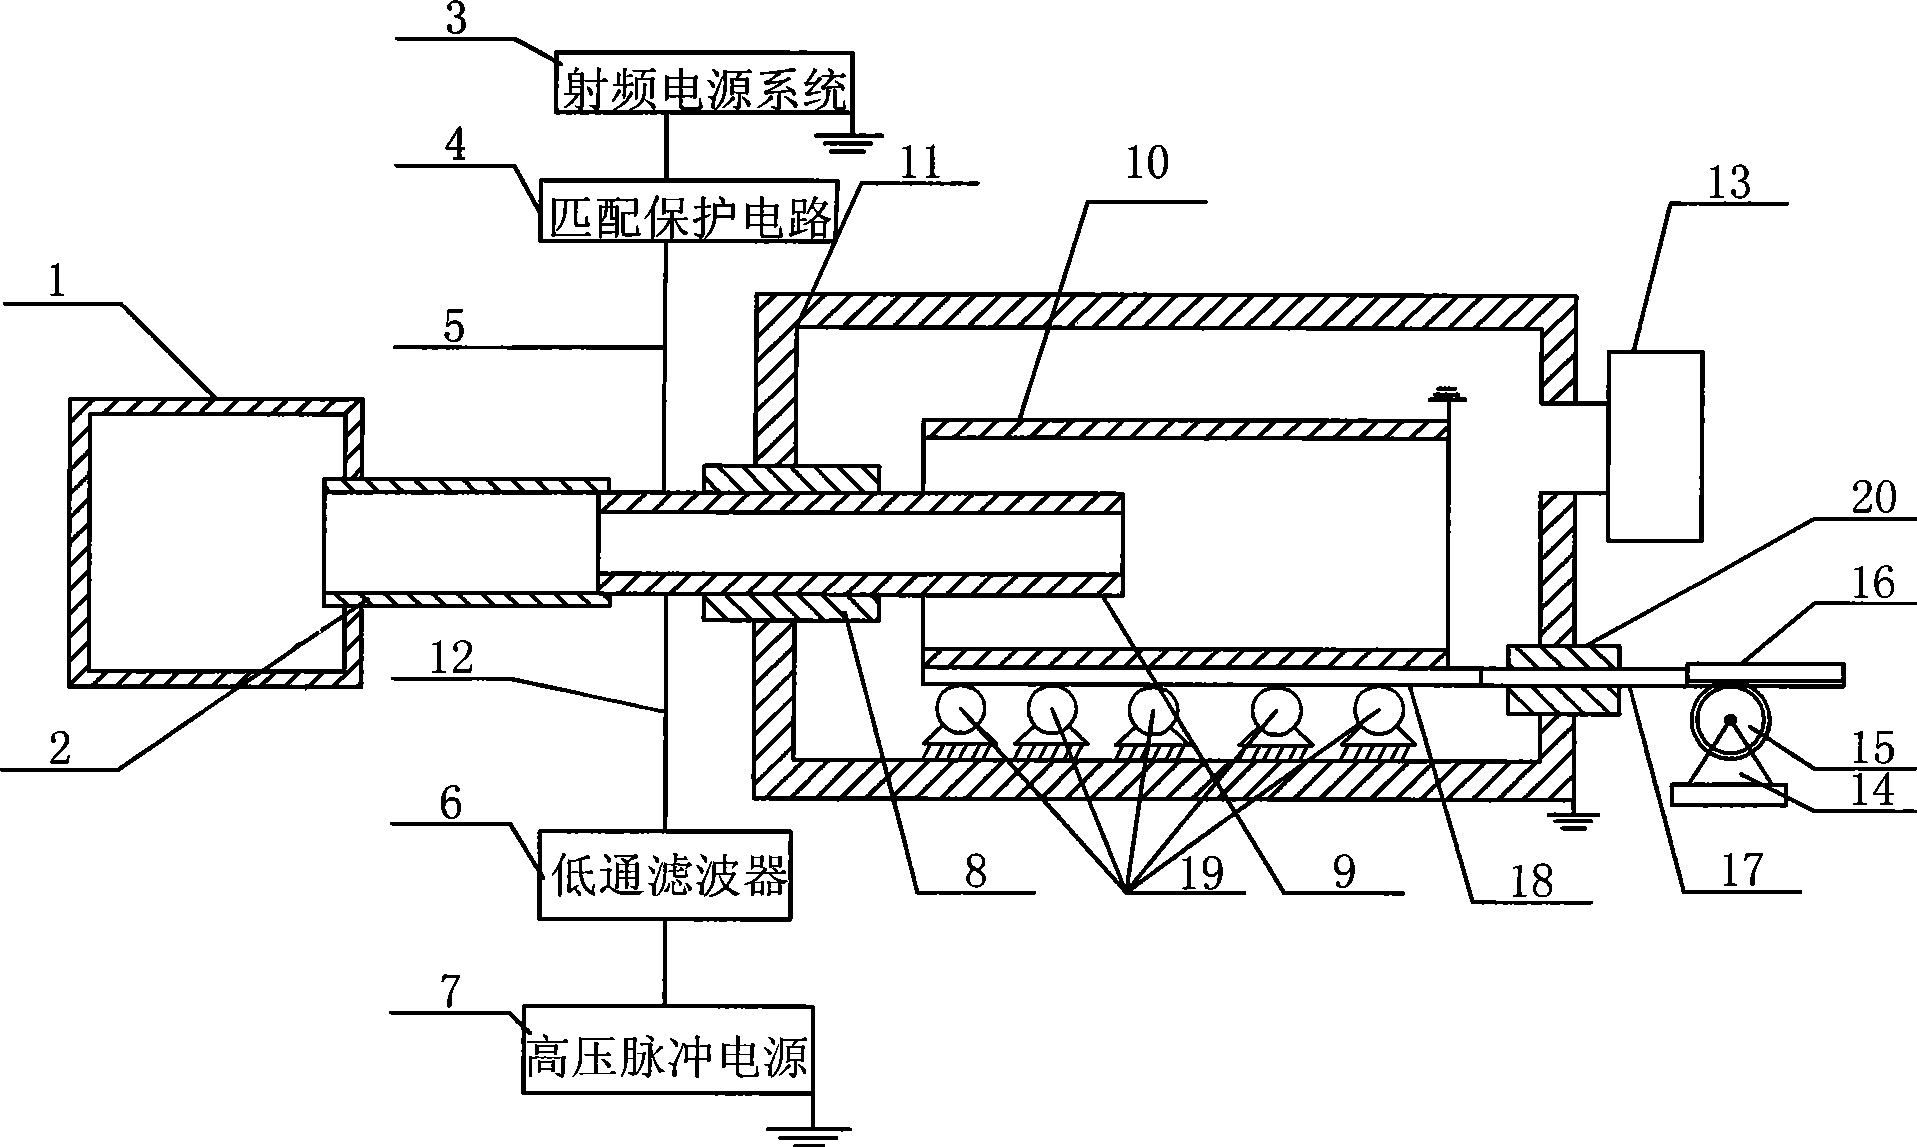 Device and method for injecting ion on inner surface of hollow cathode coupling positive voltage bias voltage tube